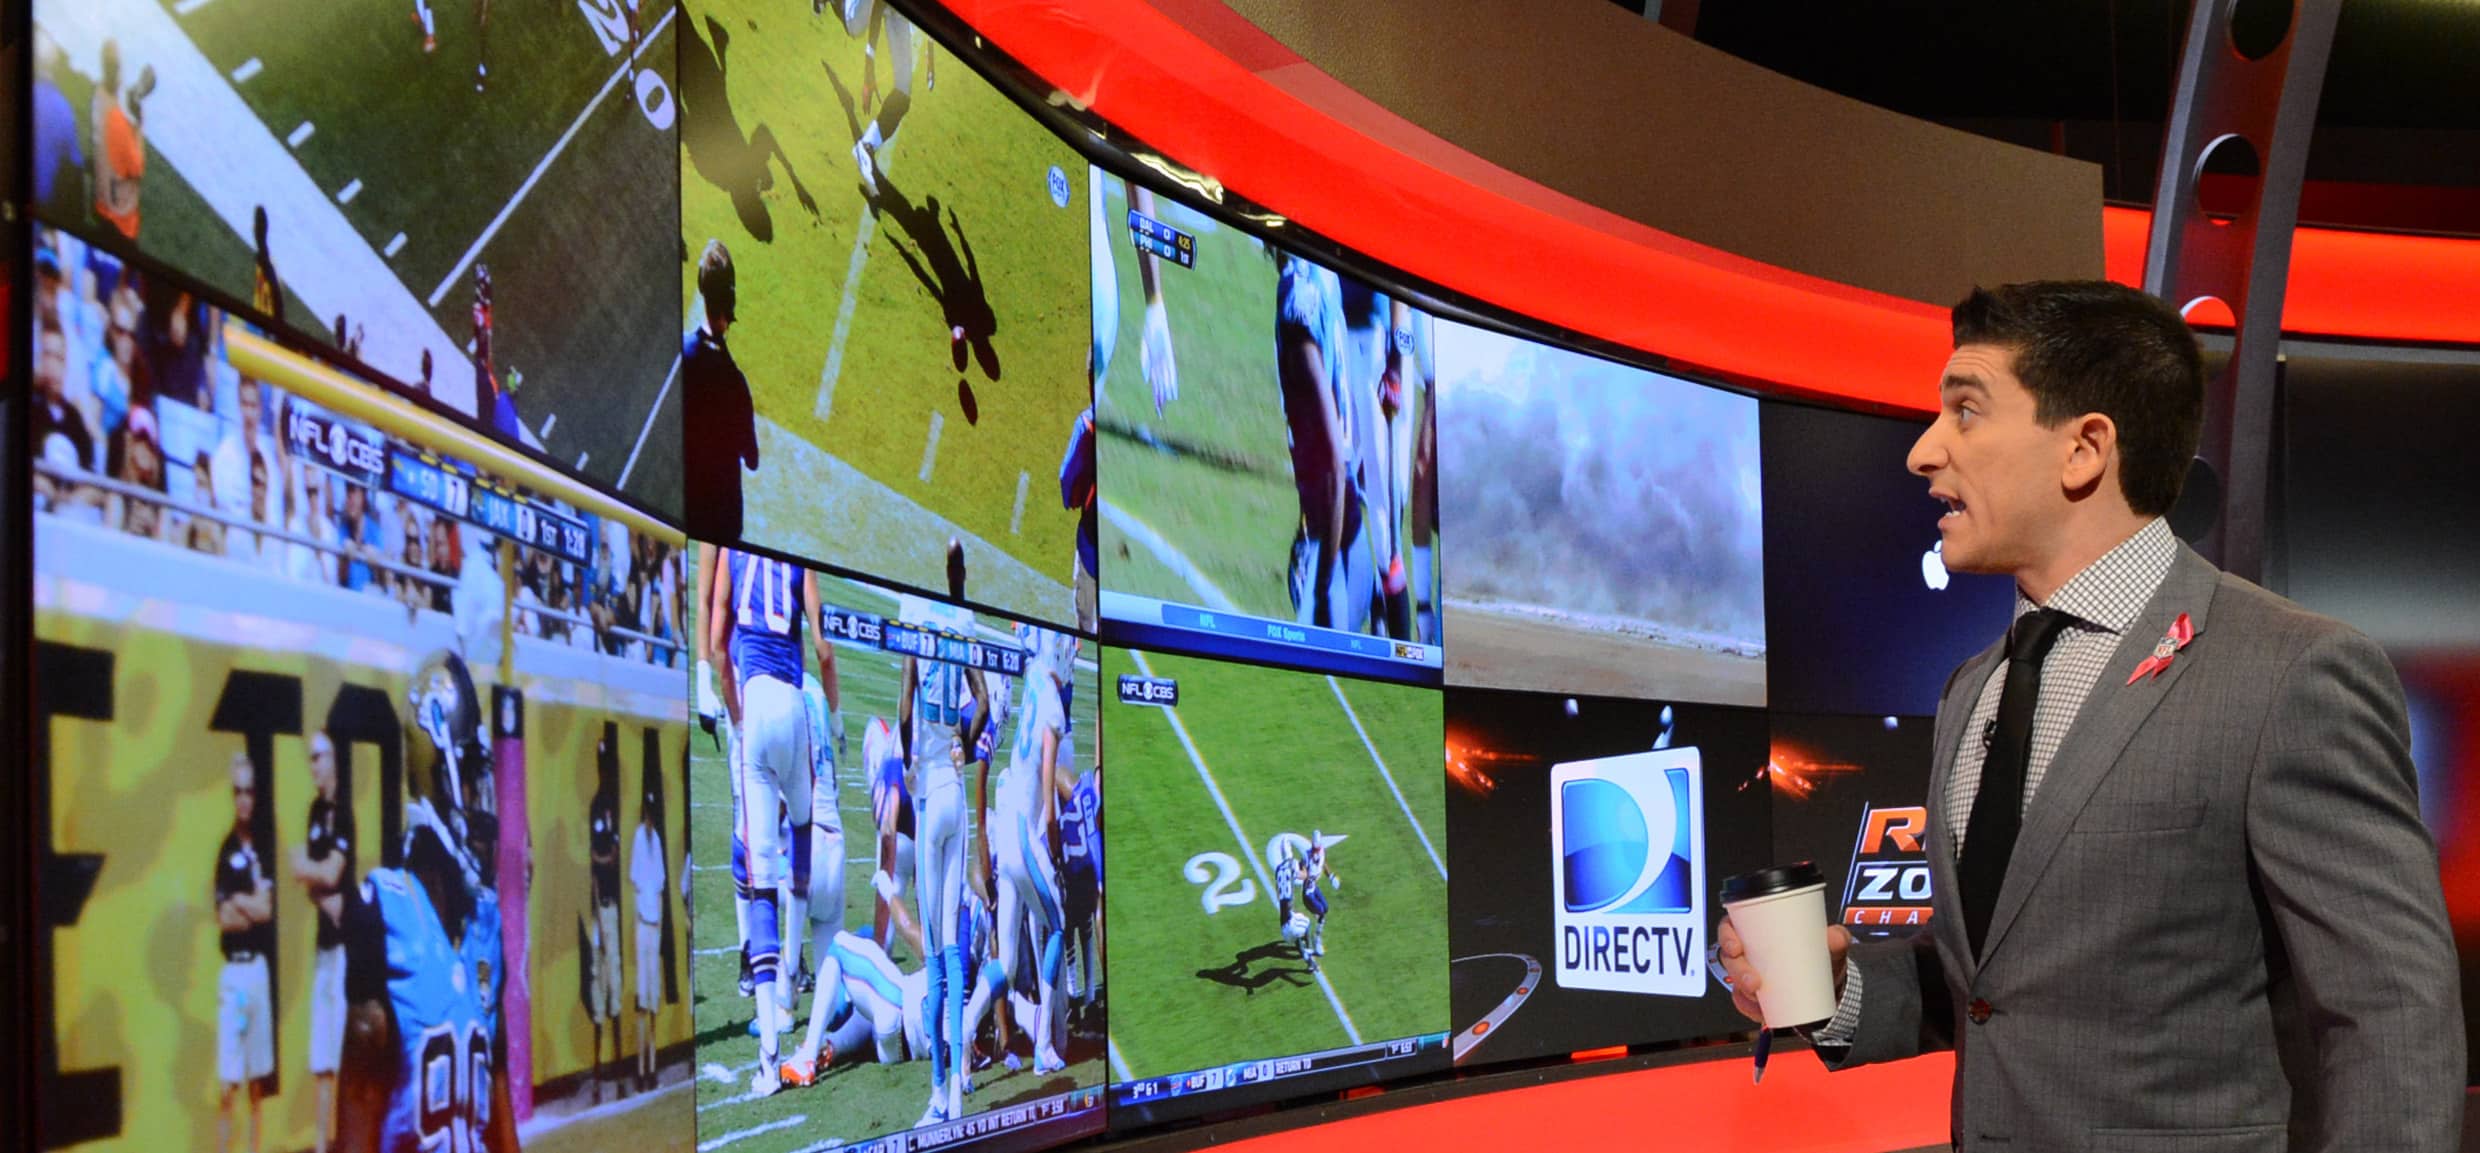 DirecTV's Red Zone Channel Going Away Next Season